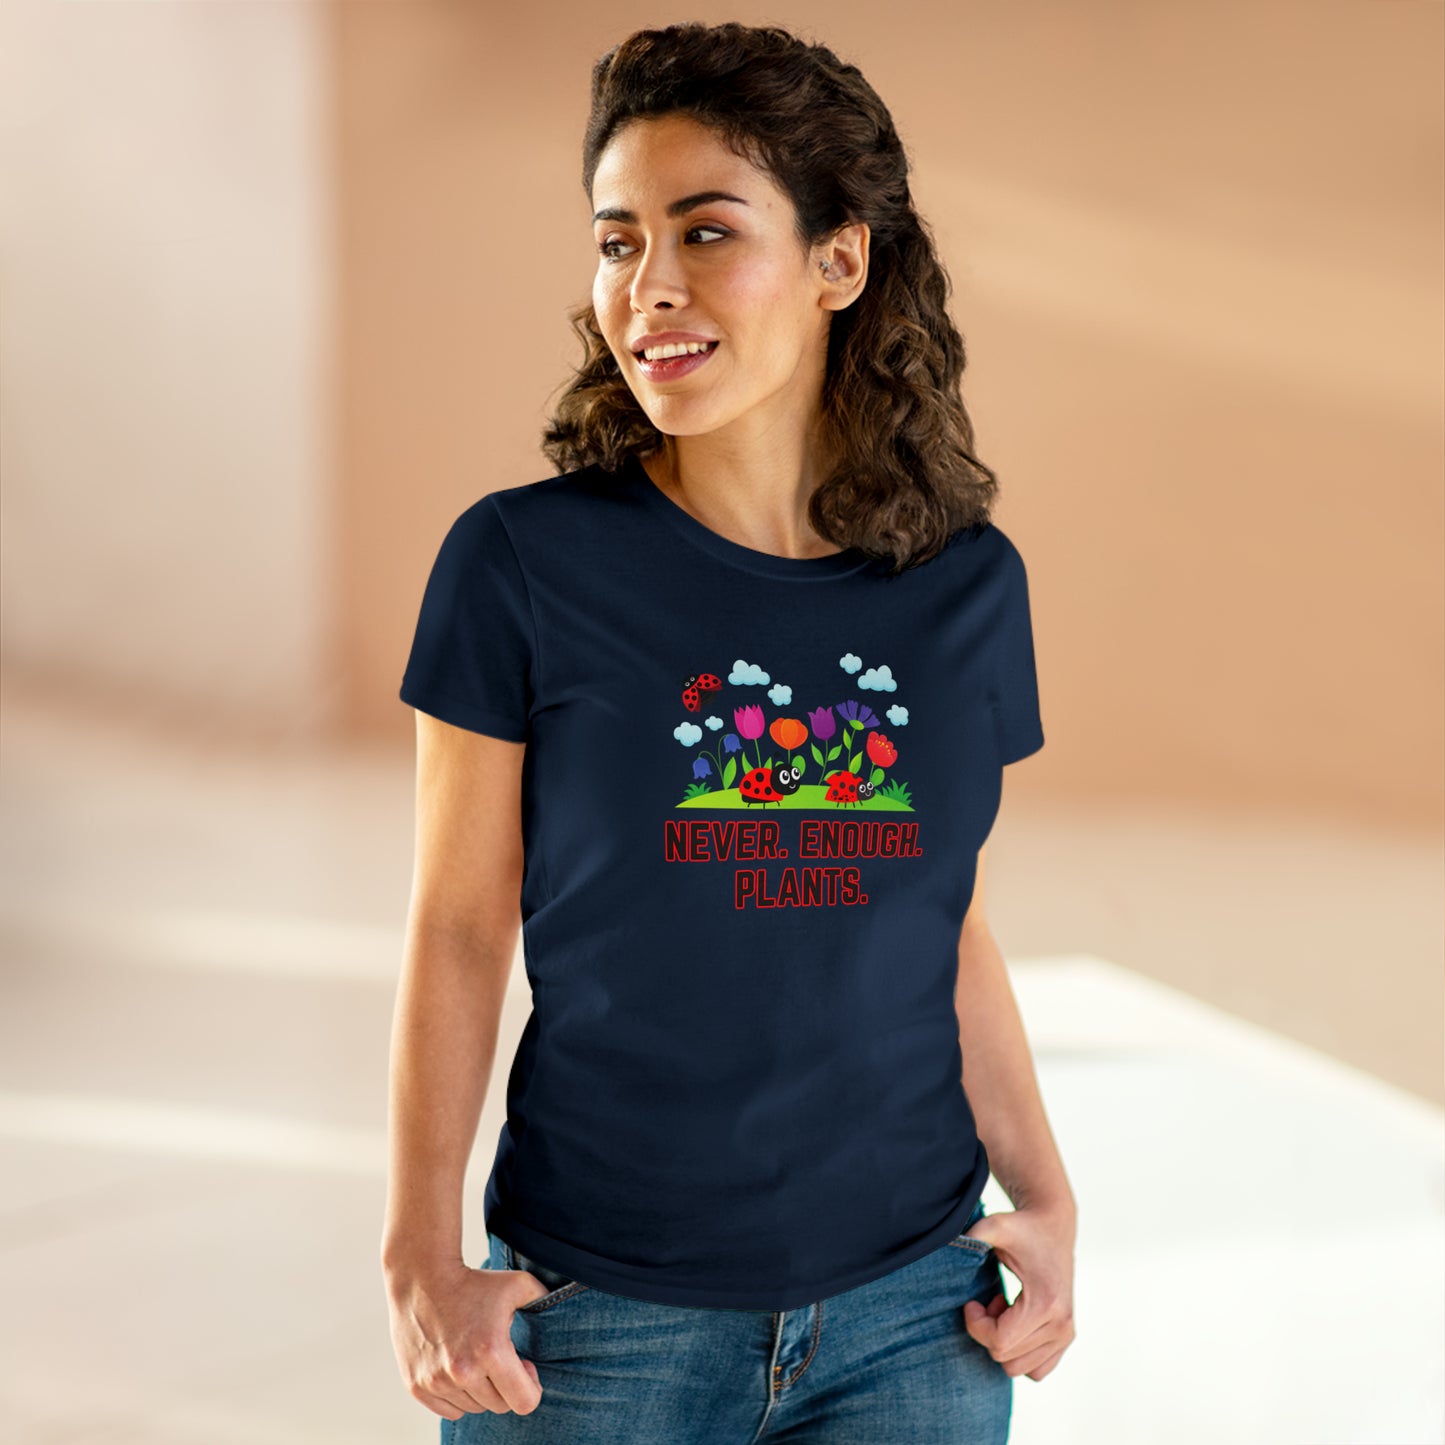 Nature, Plants, Never Enough Plants, Ladybug, Bug- Adult, Semi-fitted, T-shirt